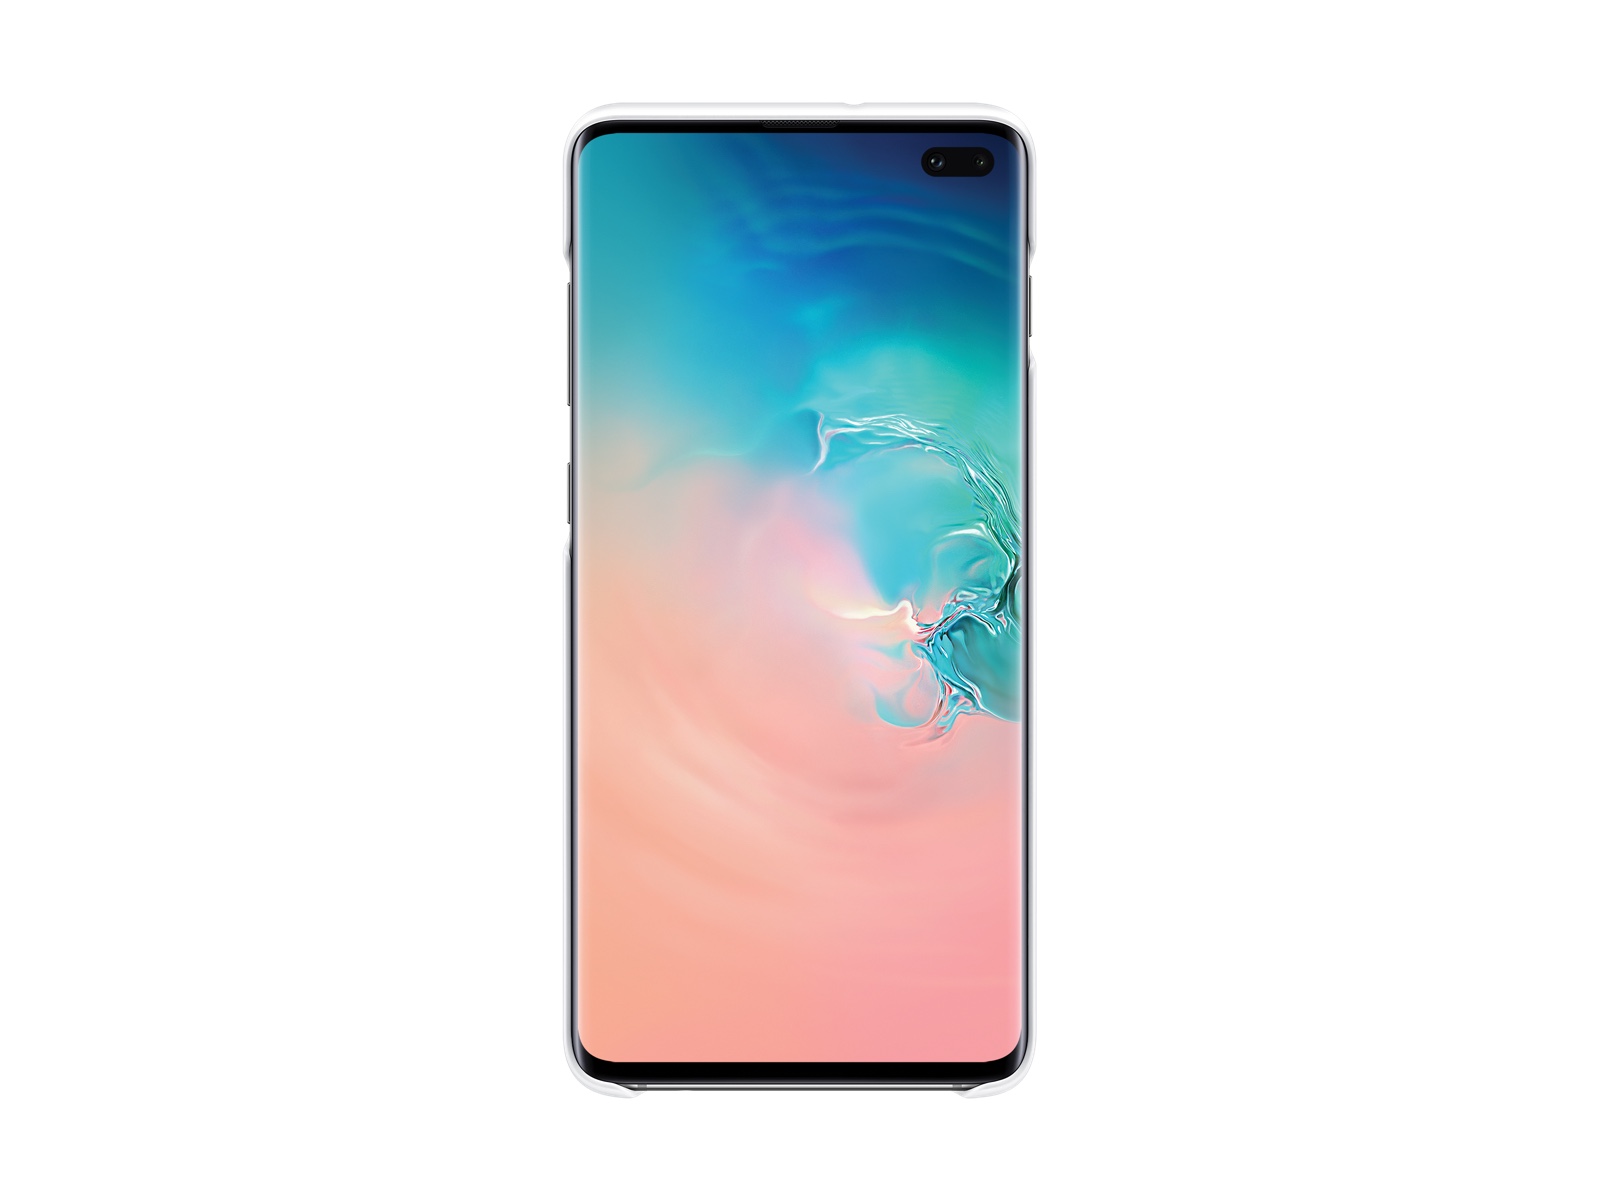 Thumbnail image of Galaxy S10+ LED Back Cover, White